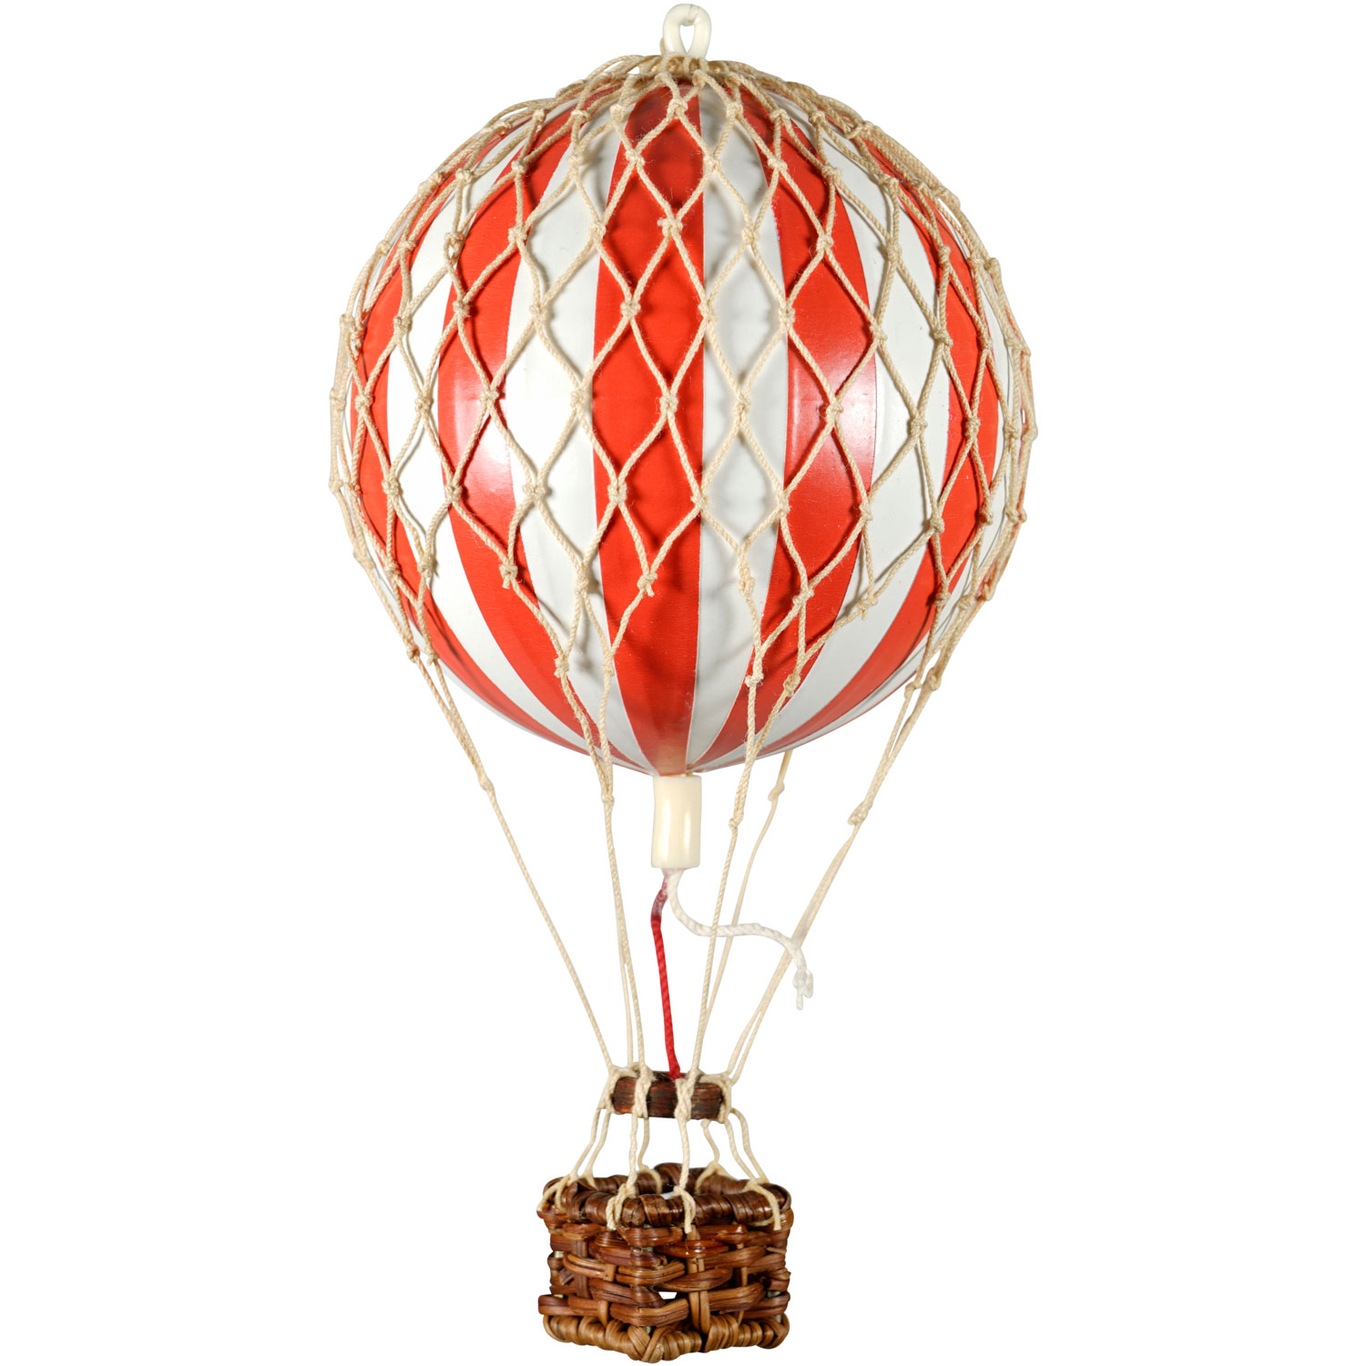 Floating The Skies Air Balloon 13x8.5 cm, Red / White